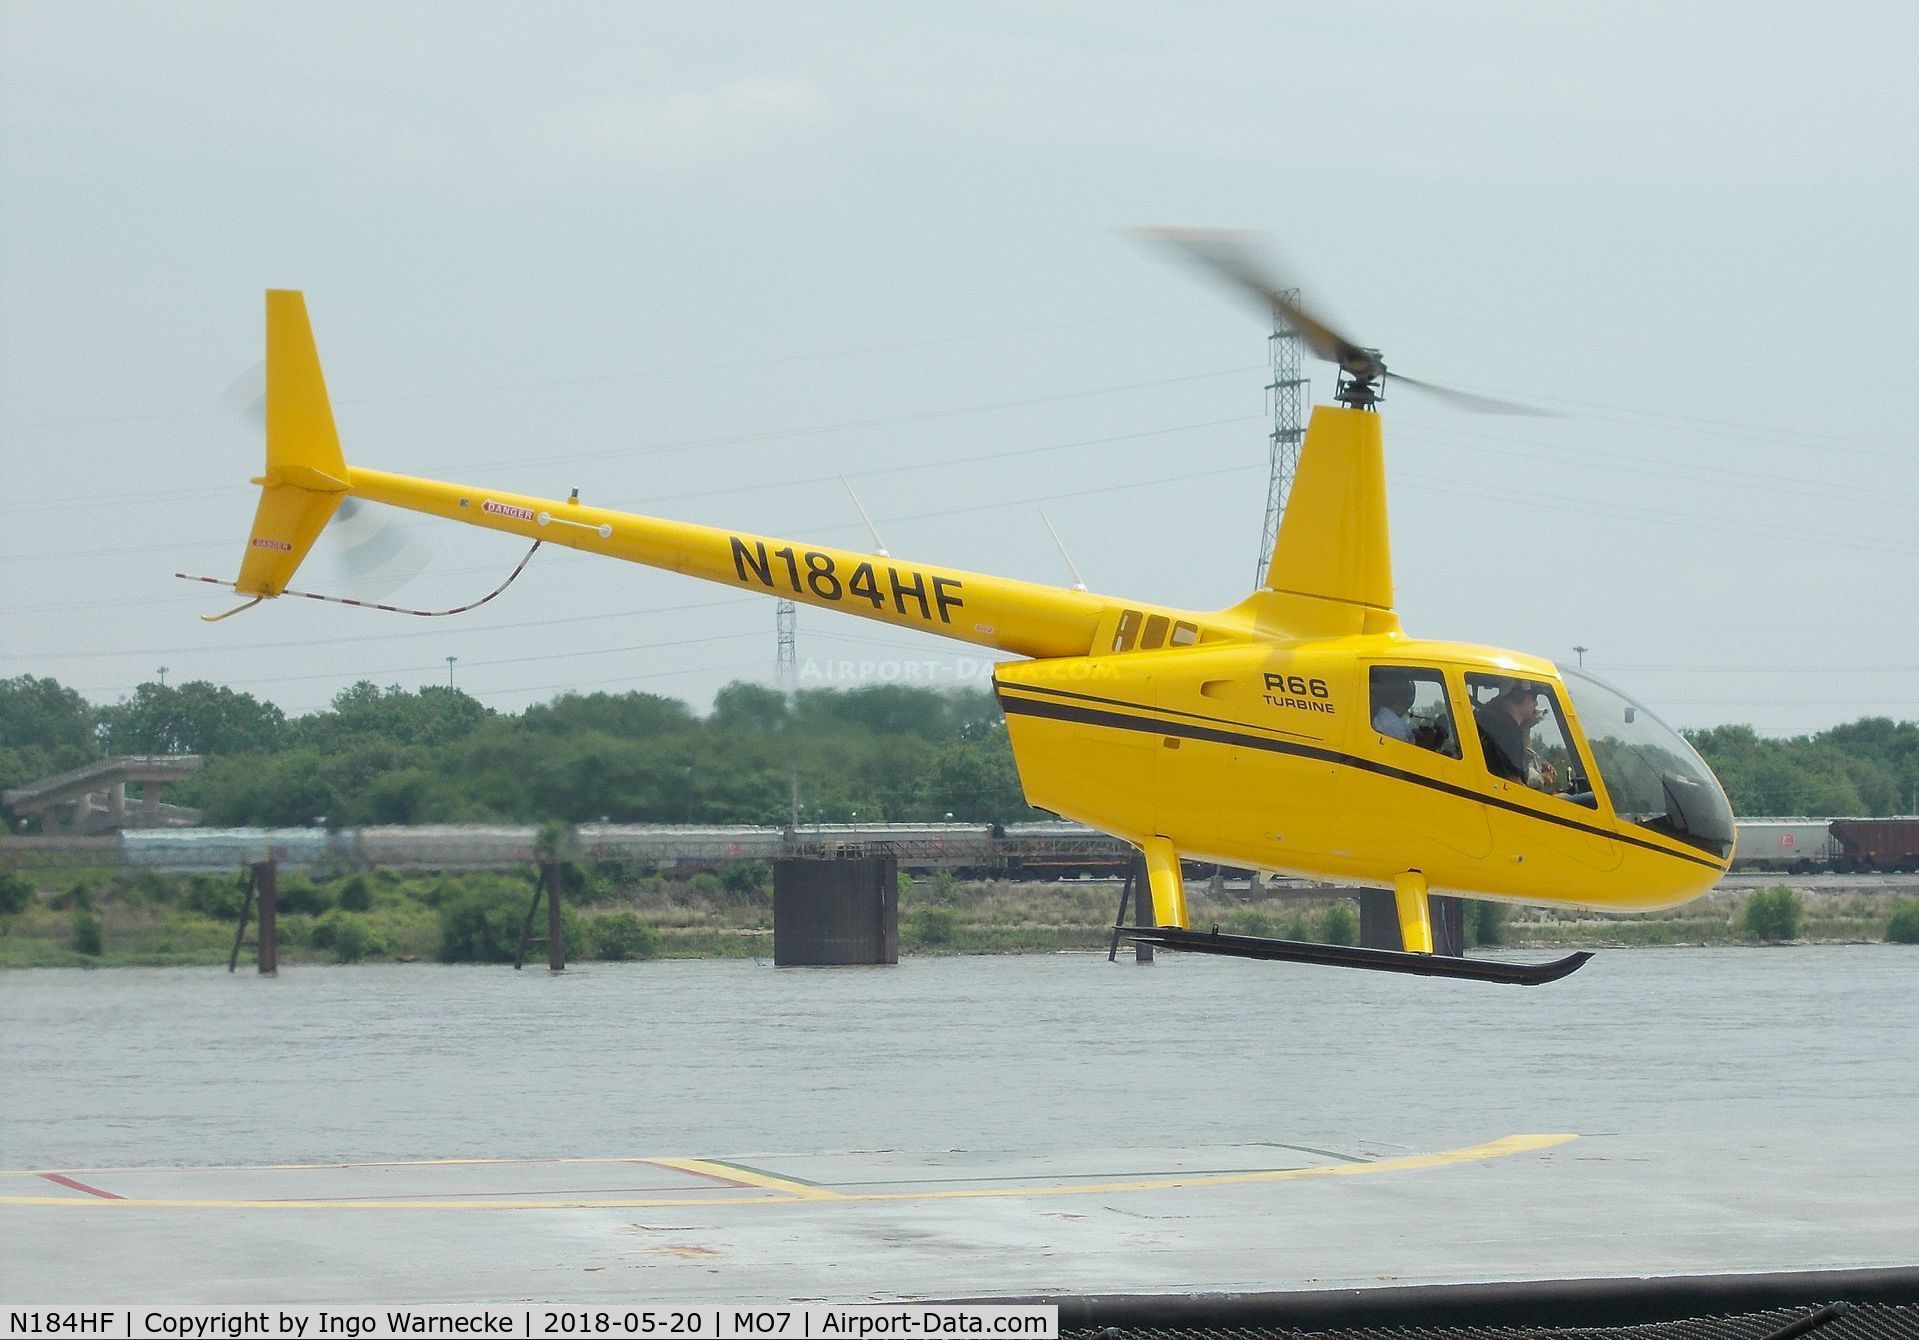 N184HF, 2012 Robinson R66 Turbine C/N 0184, Robinson R66 Turbine of Gateway Helicopter Tours at St. Louis Downtown heliport, St. Louis MO